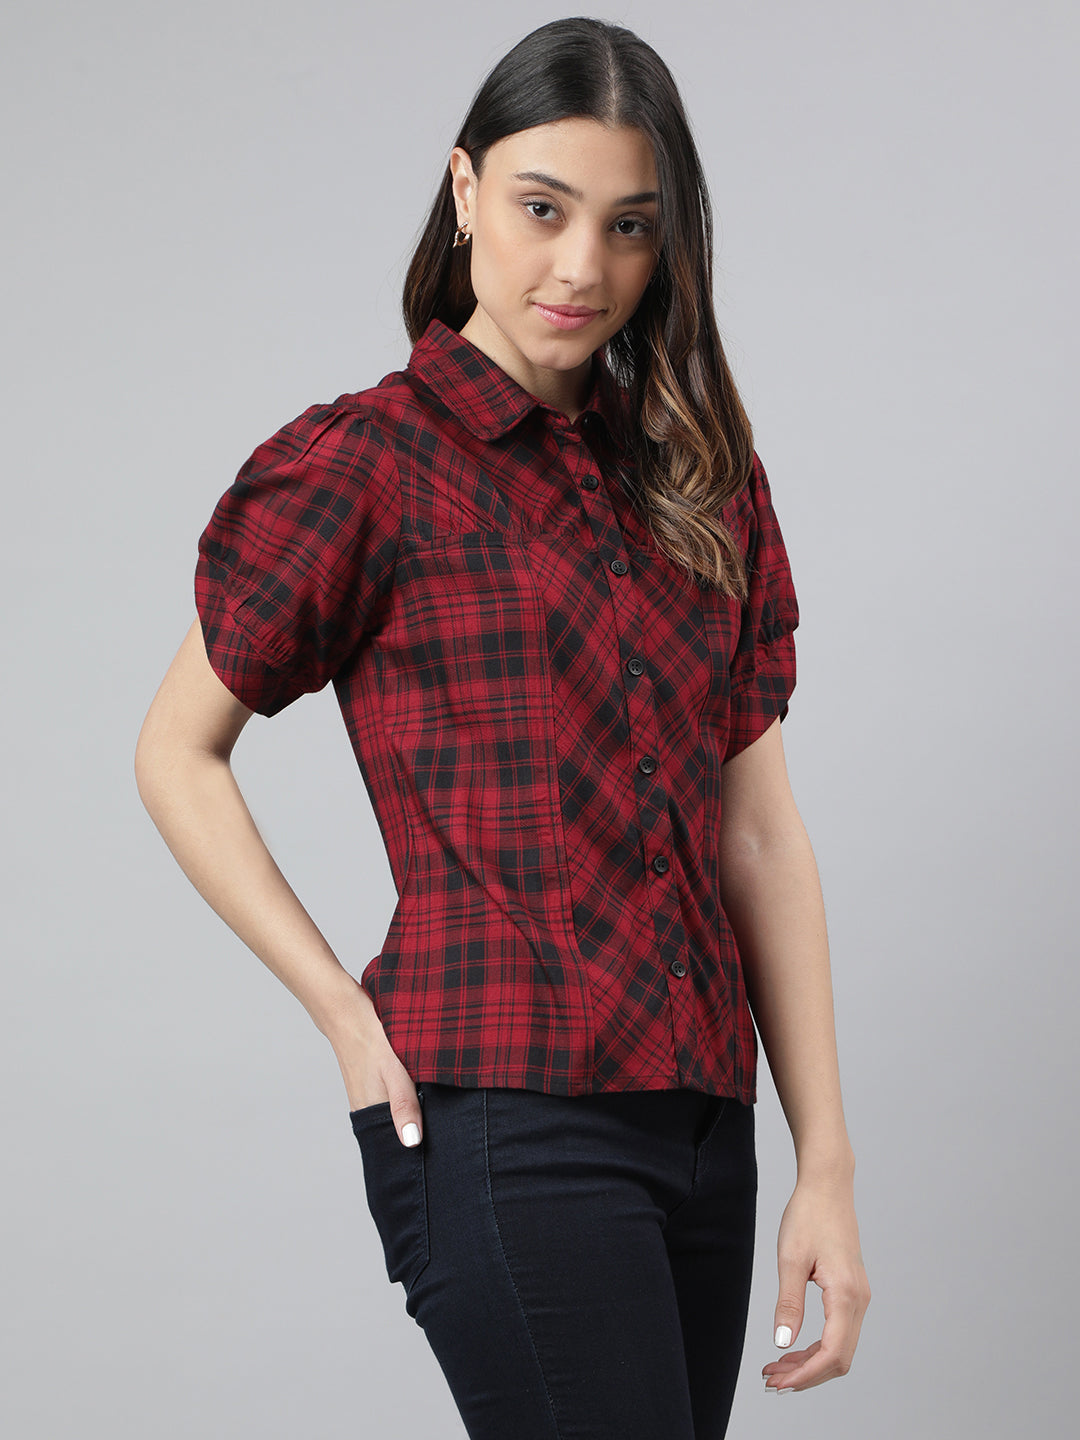 Maroon Half Sleeve Collar Neck Check Shirt Women Blouse Top for Casual